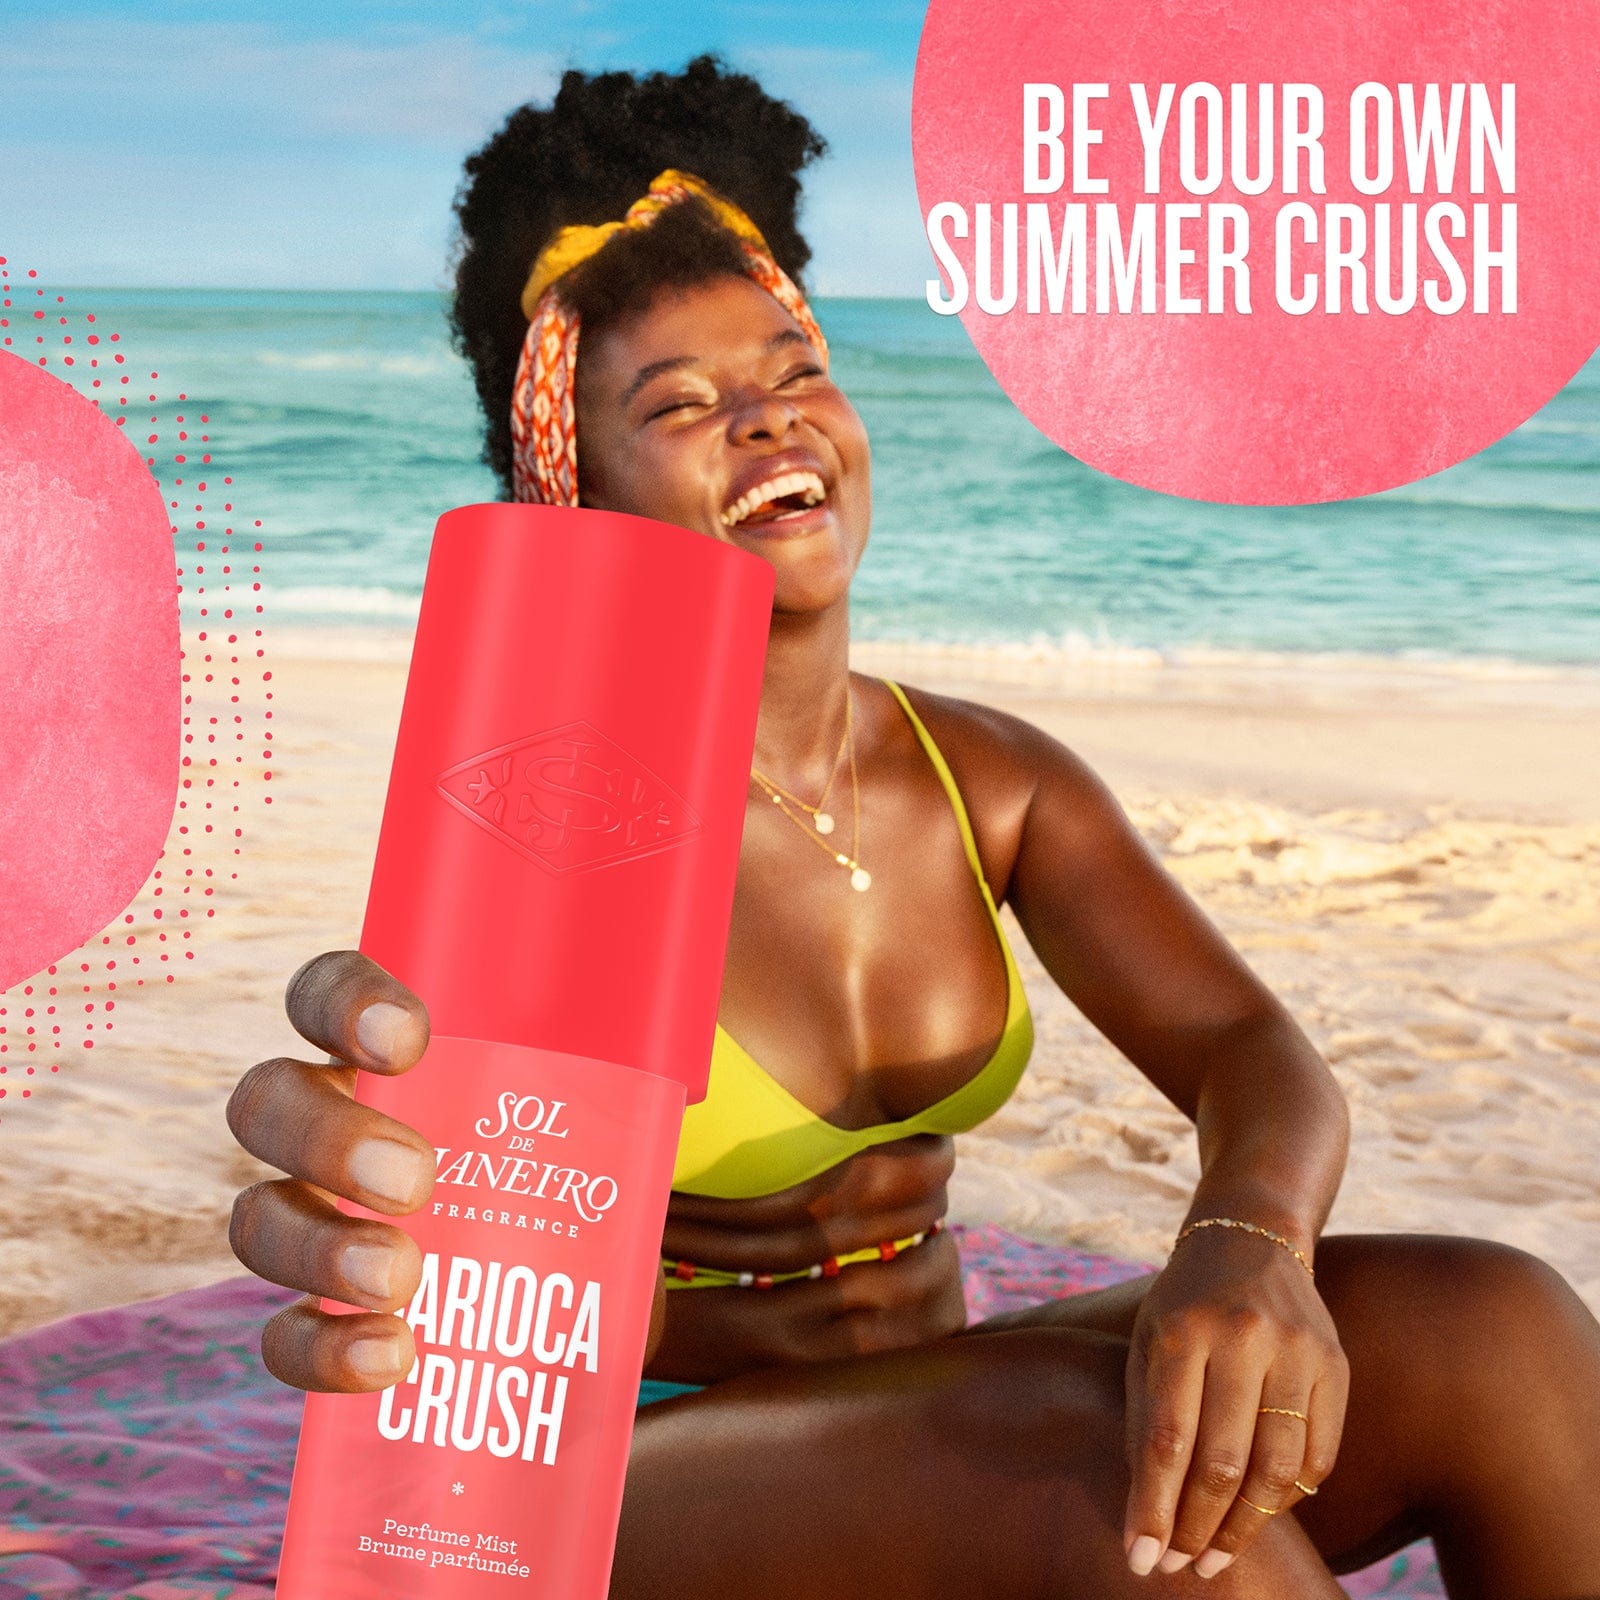 Be your own summer crush